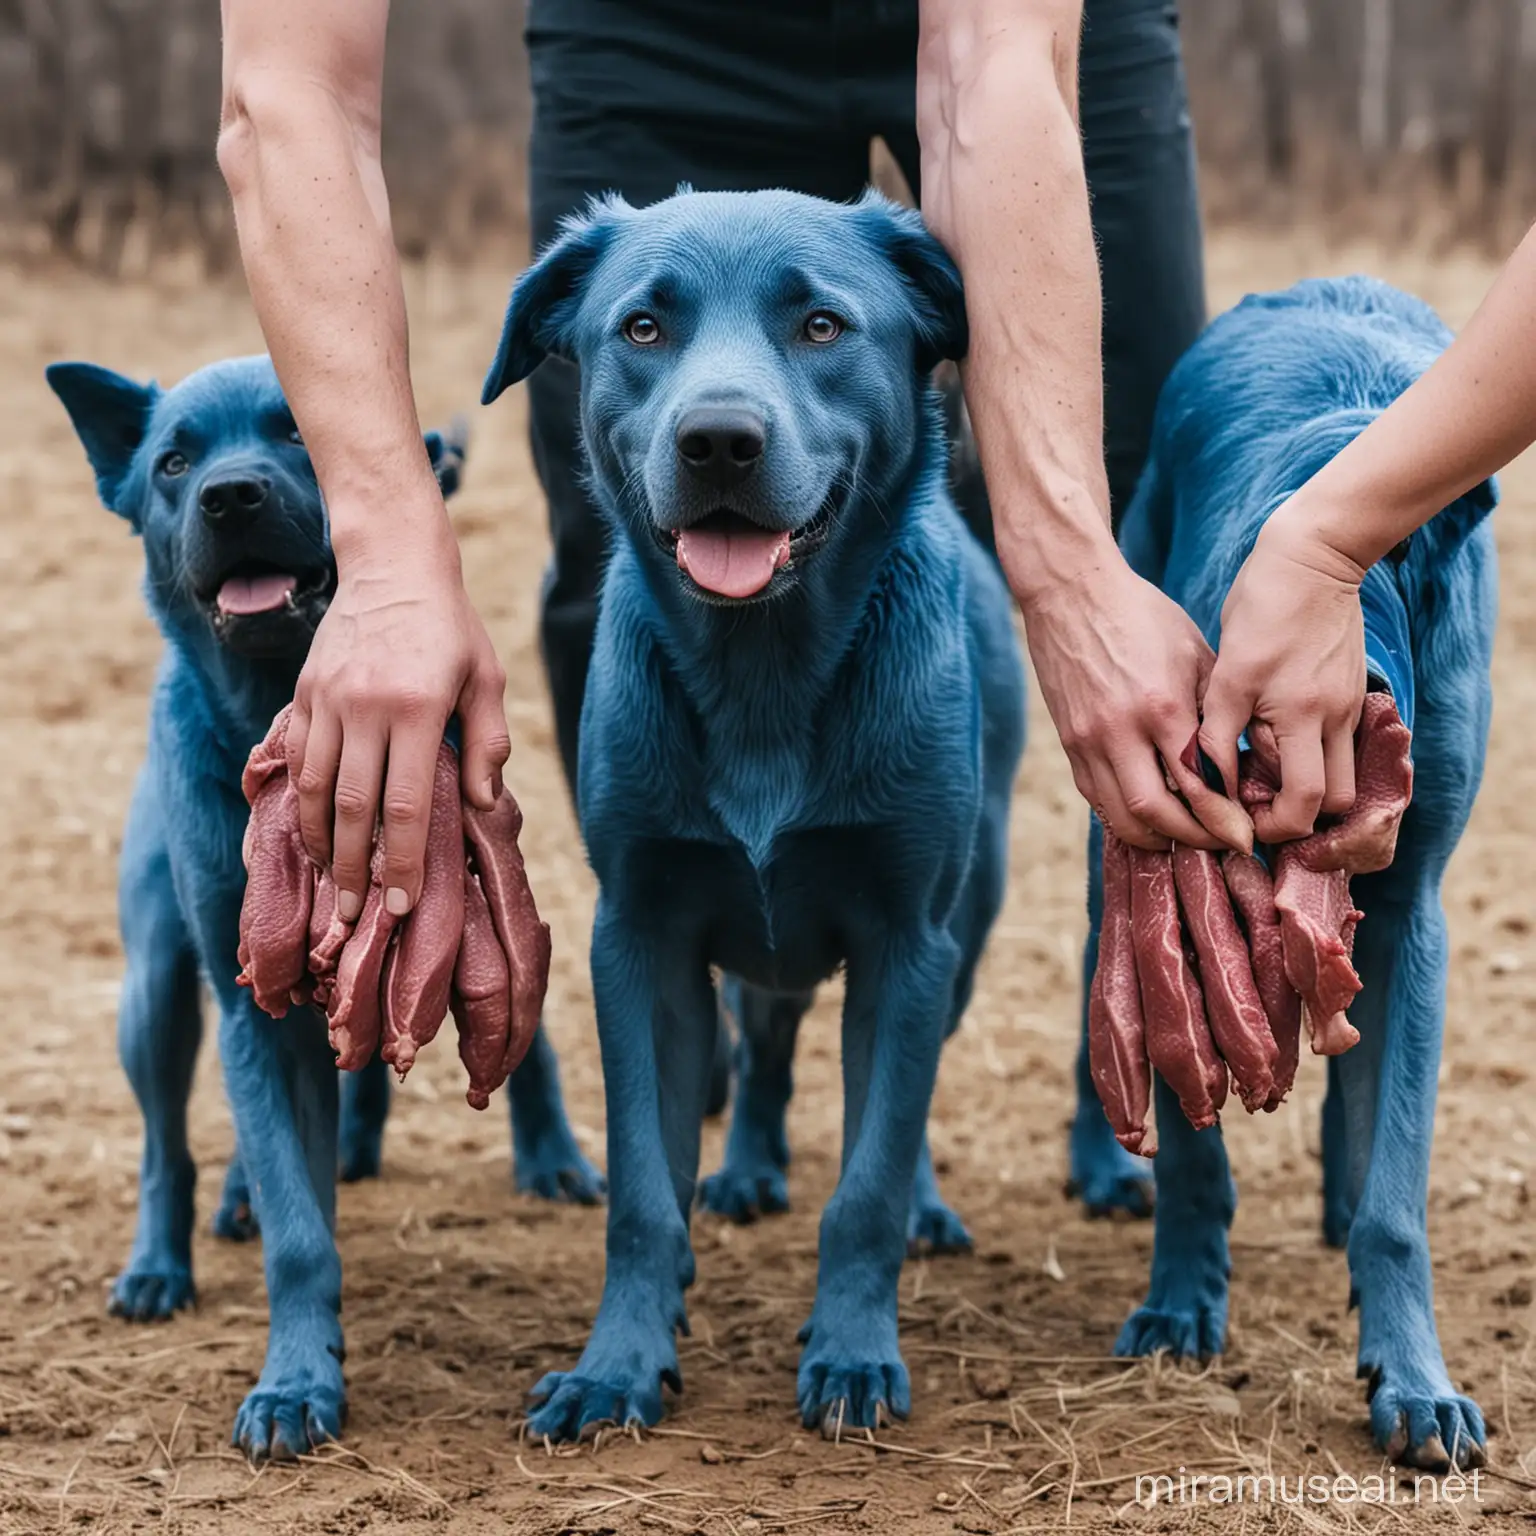 Blue Dogs Holding Meat Surreal Animal Artwork